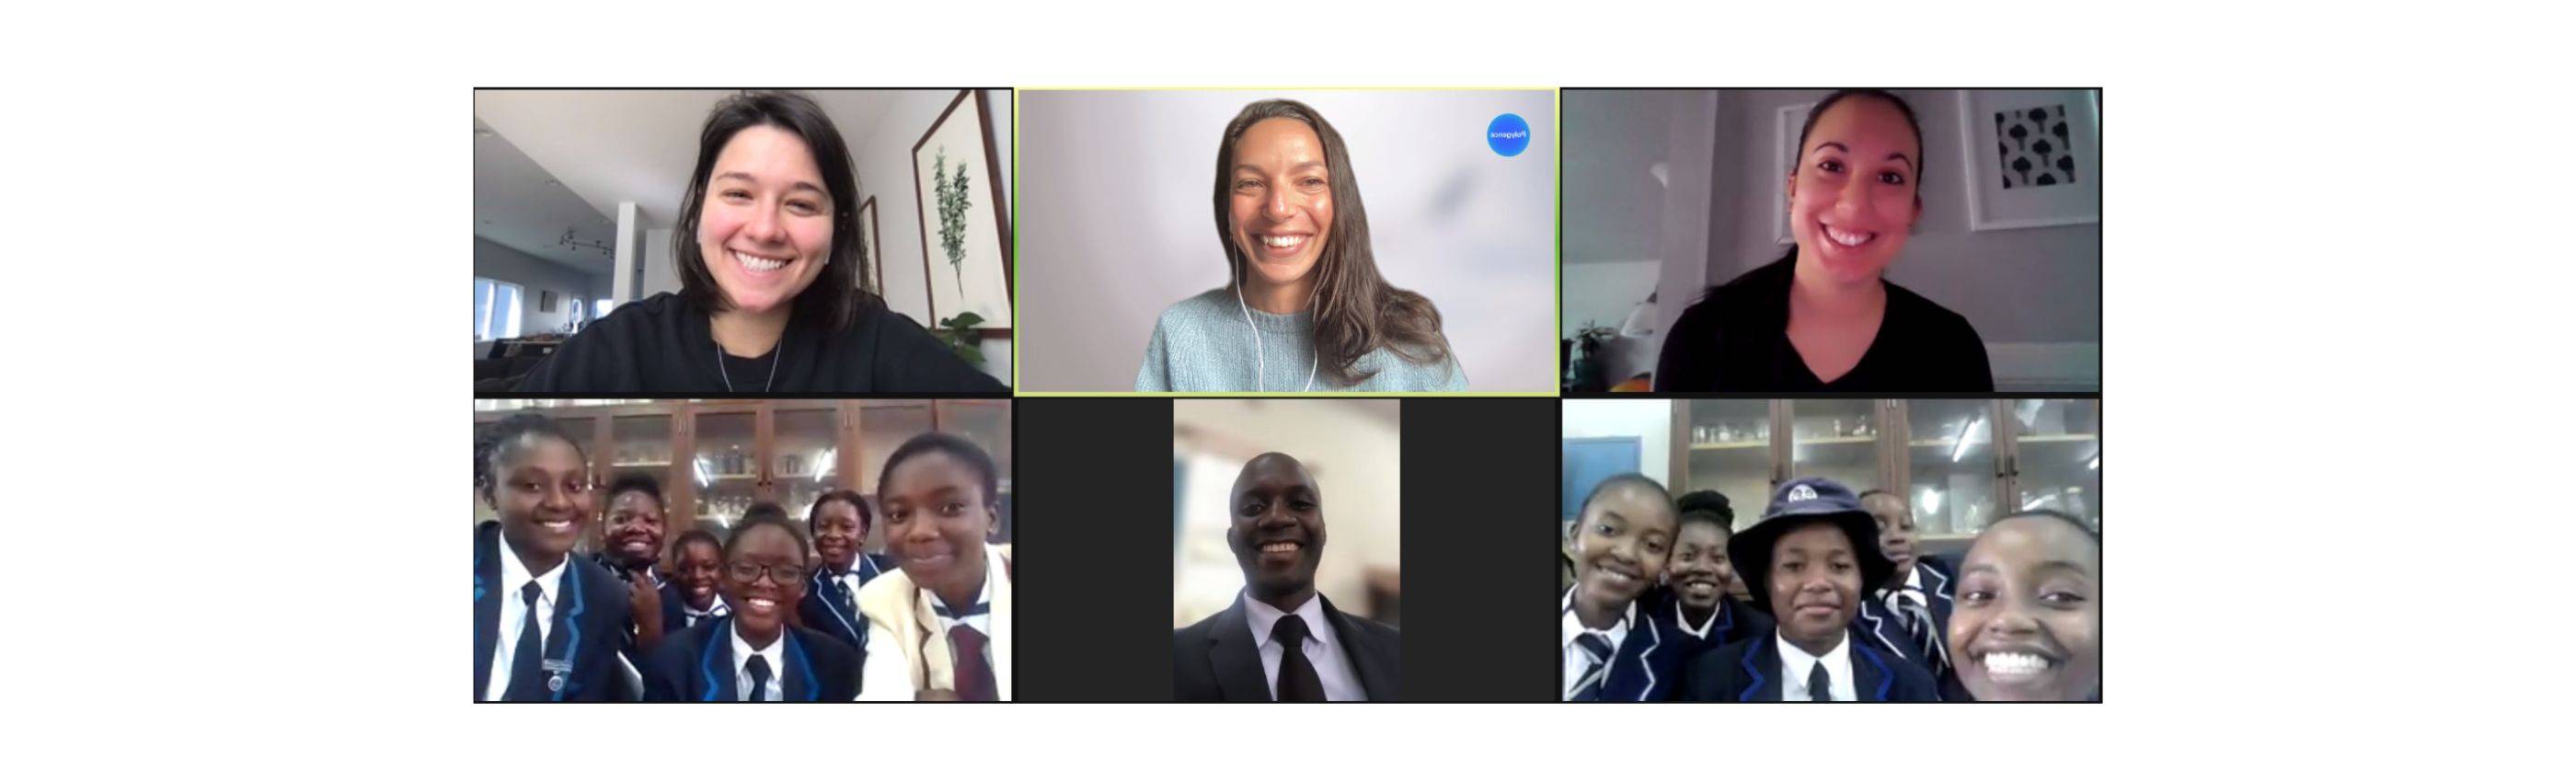 smiling students and smiling teachers on zoom call screen